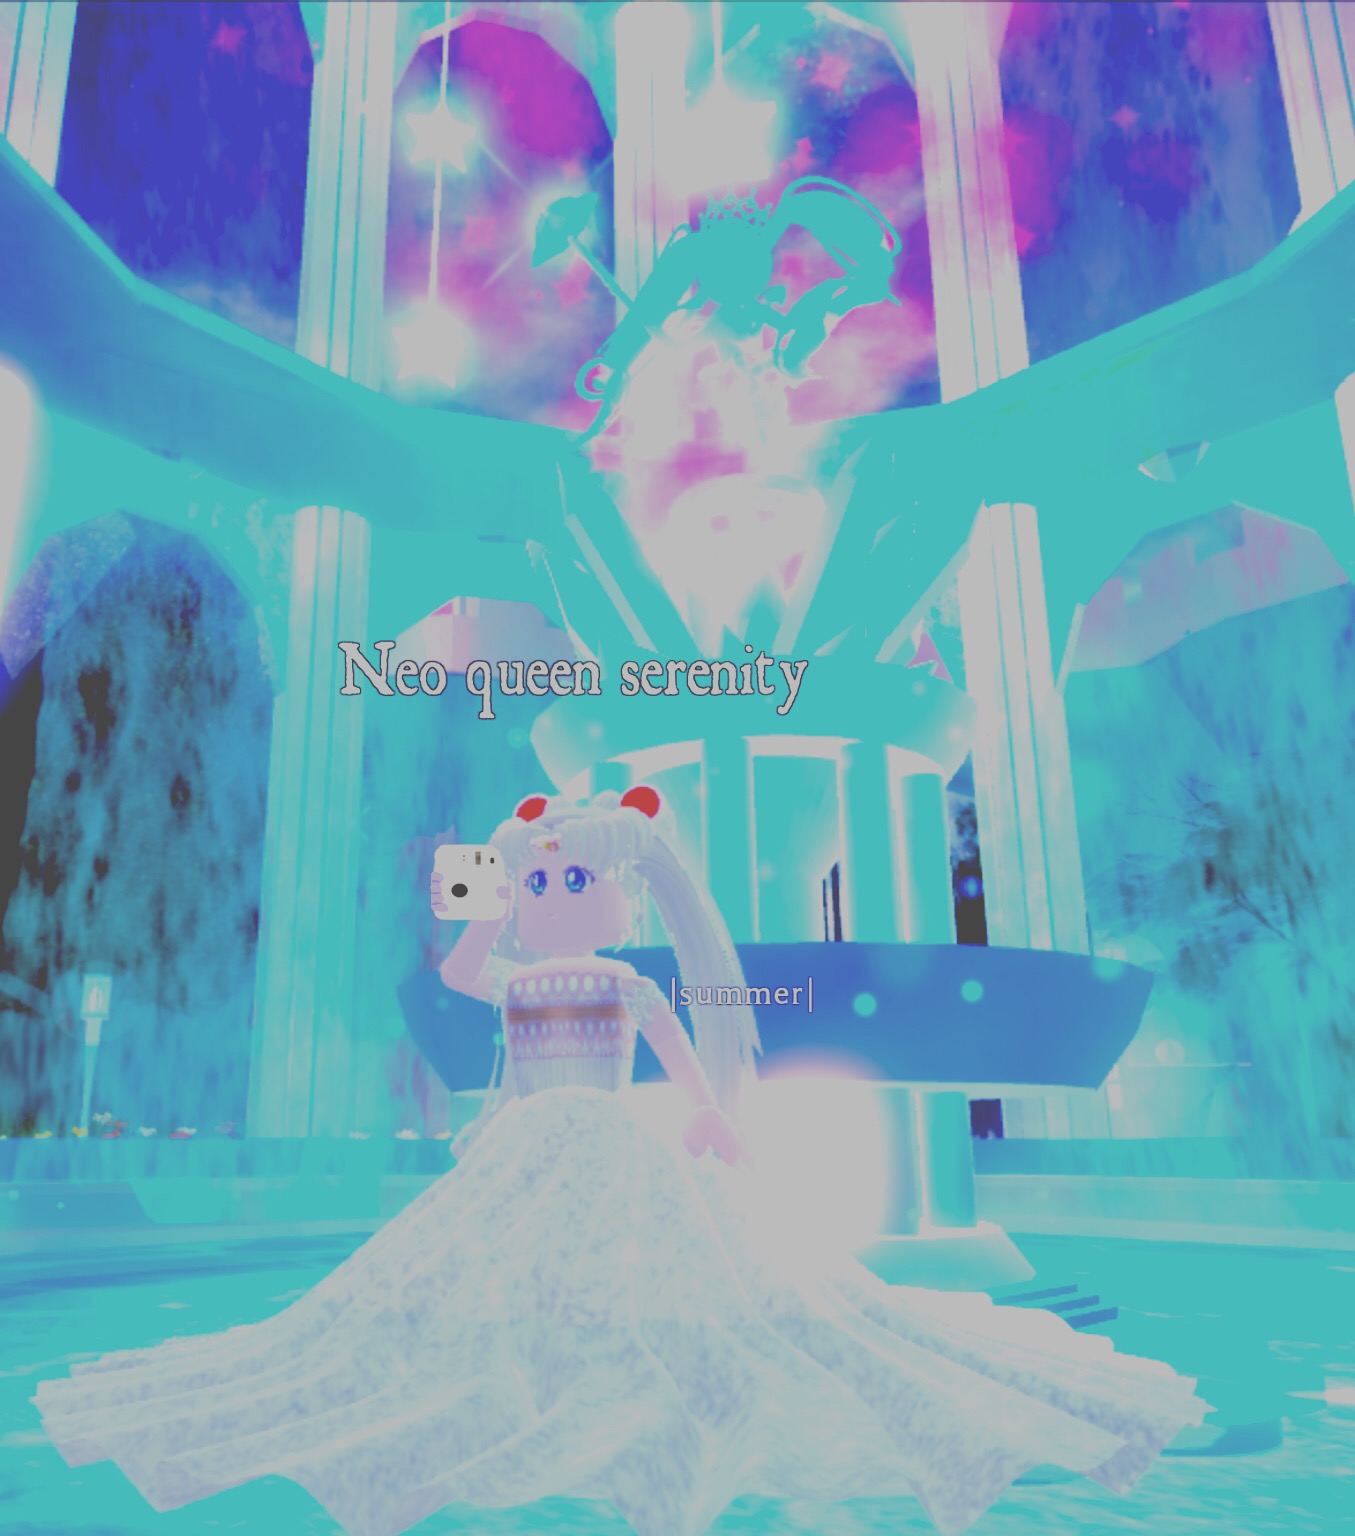 Roblox Royalehigh Aesthetic Image By Serenity - sailor moon roblox royale high roblox picture codes quotes